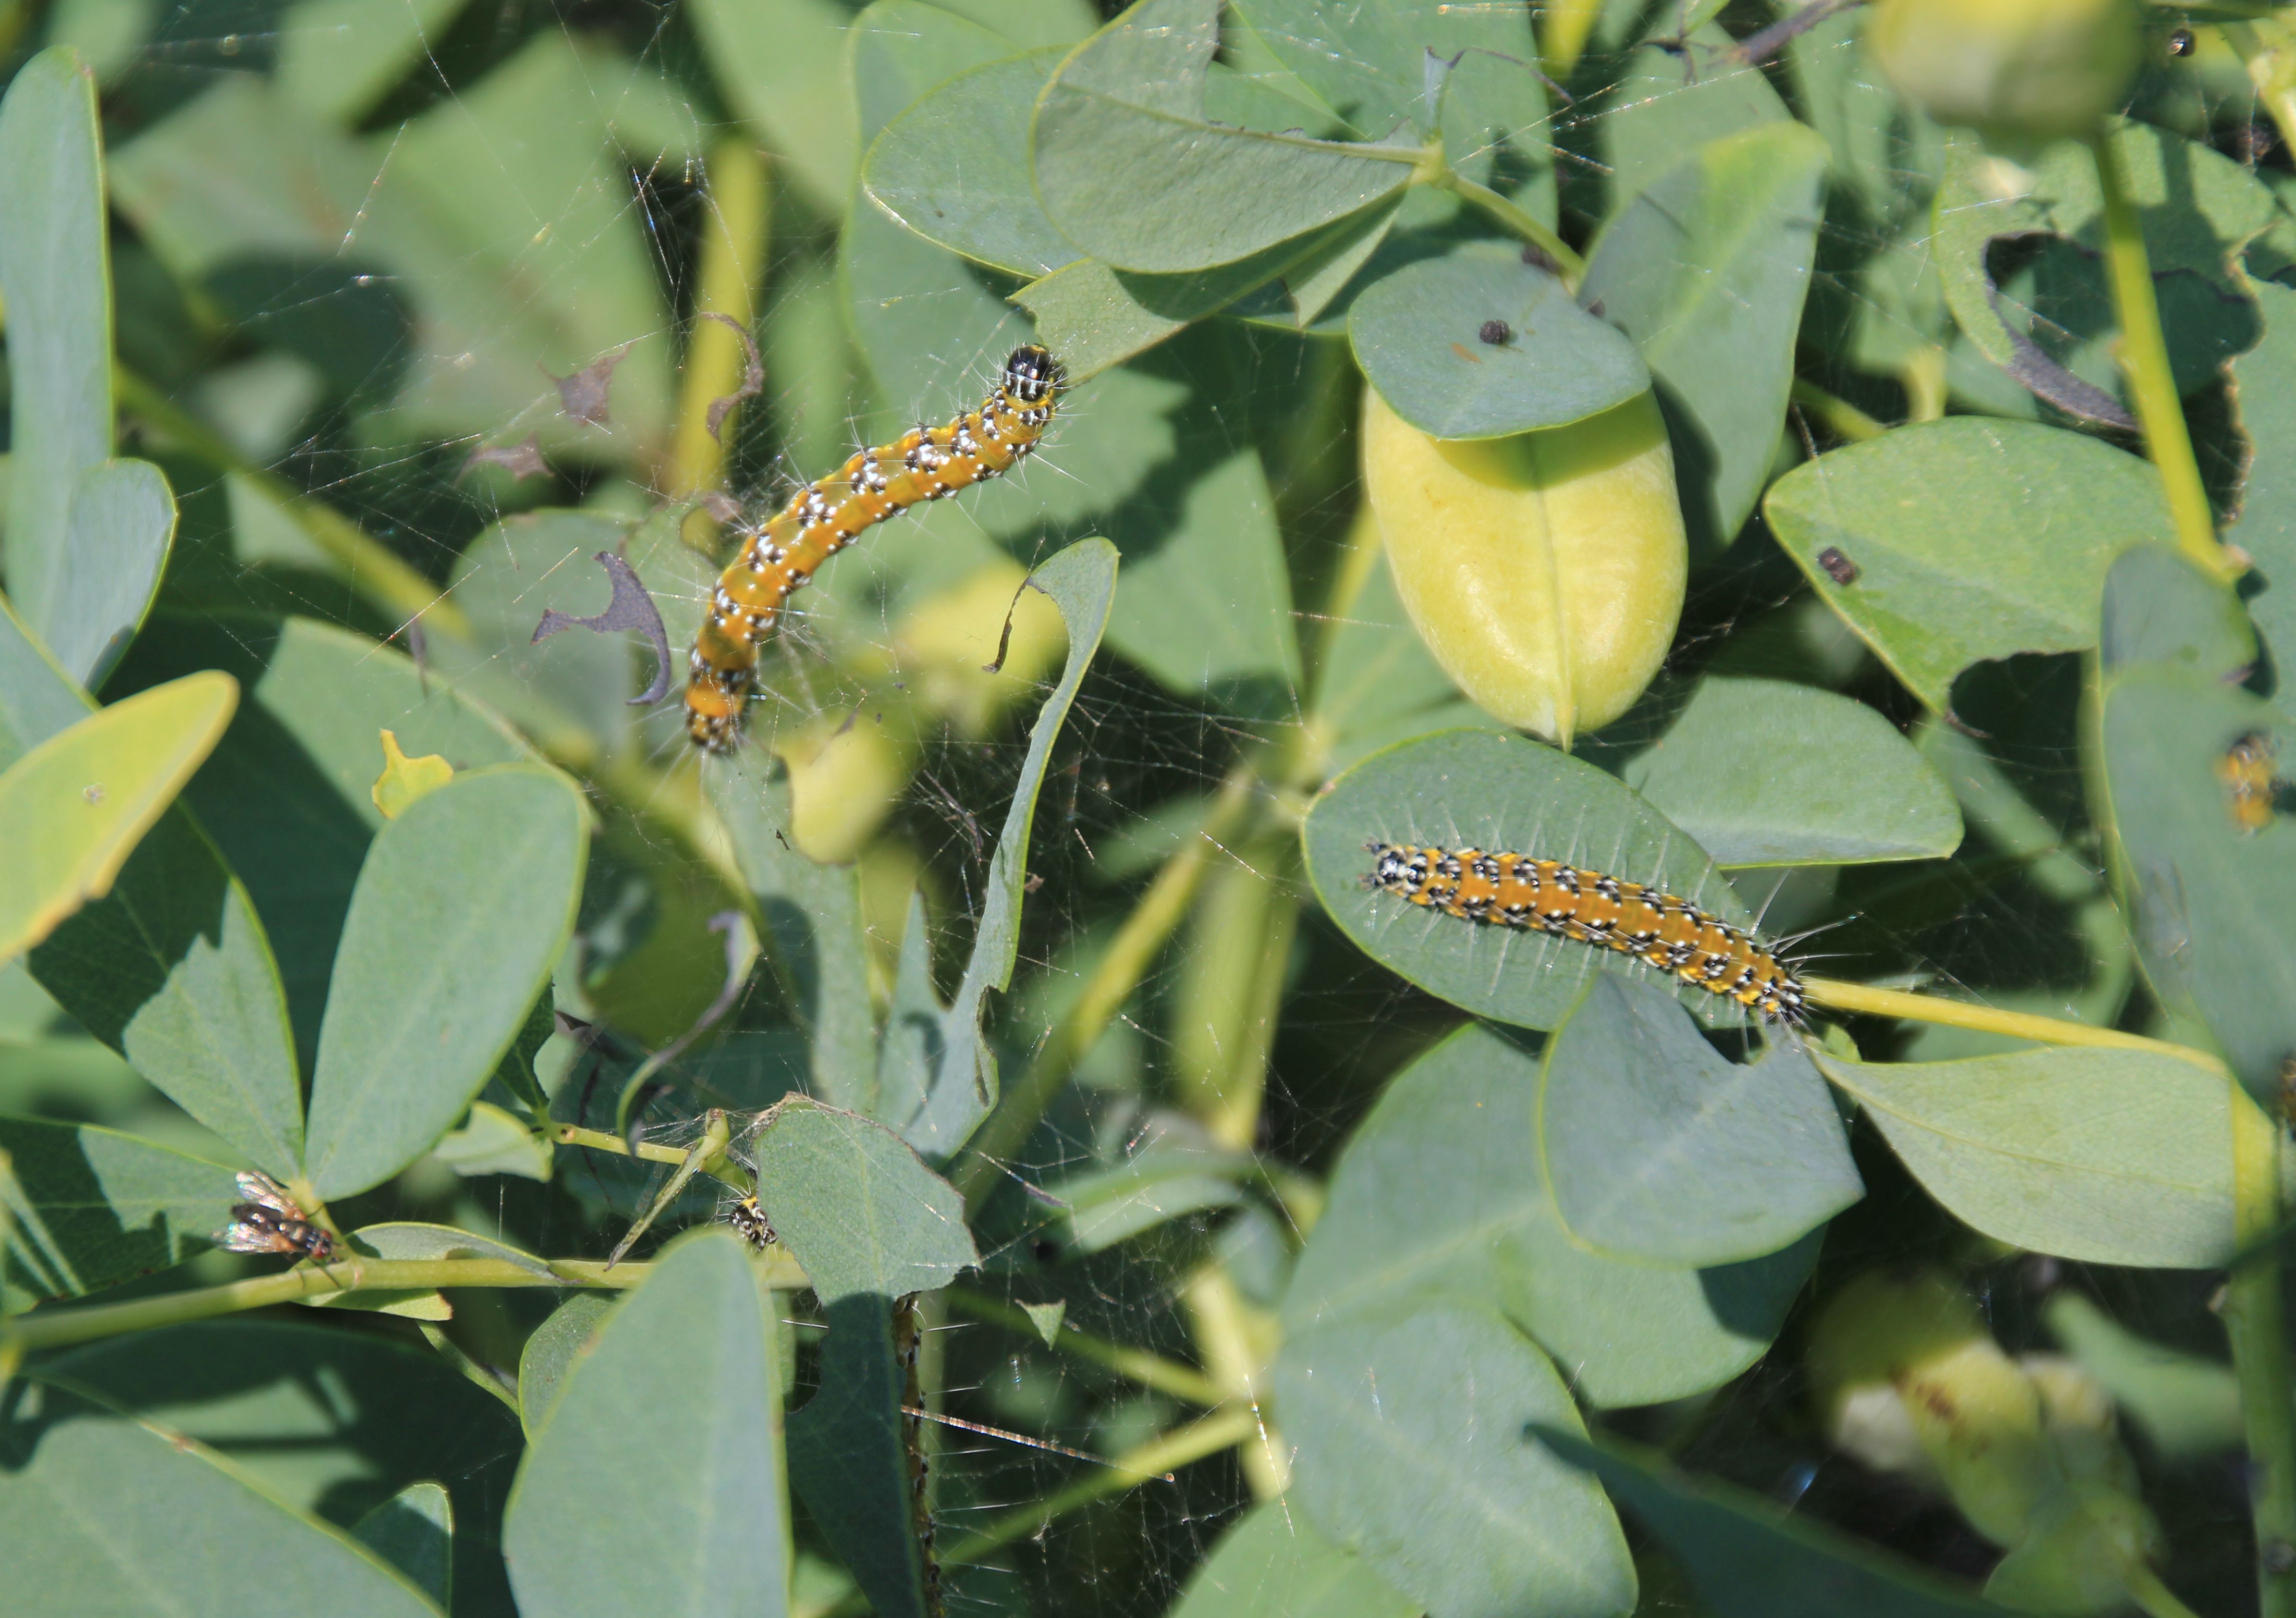 two orange and white caterpillars feeding on green plant leaves.